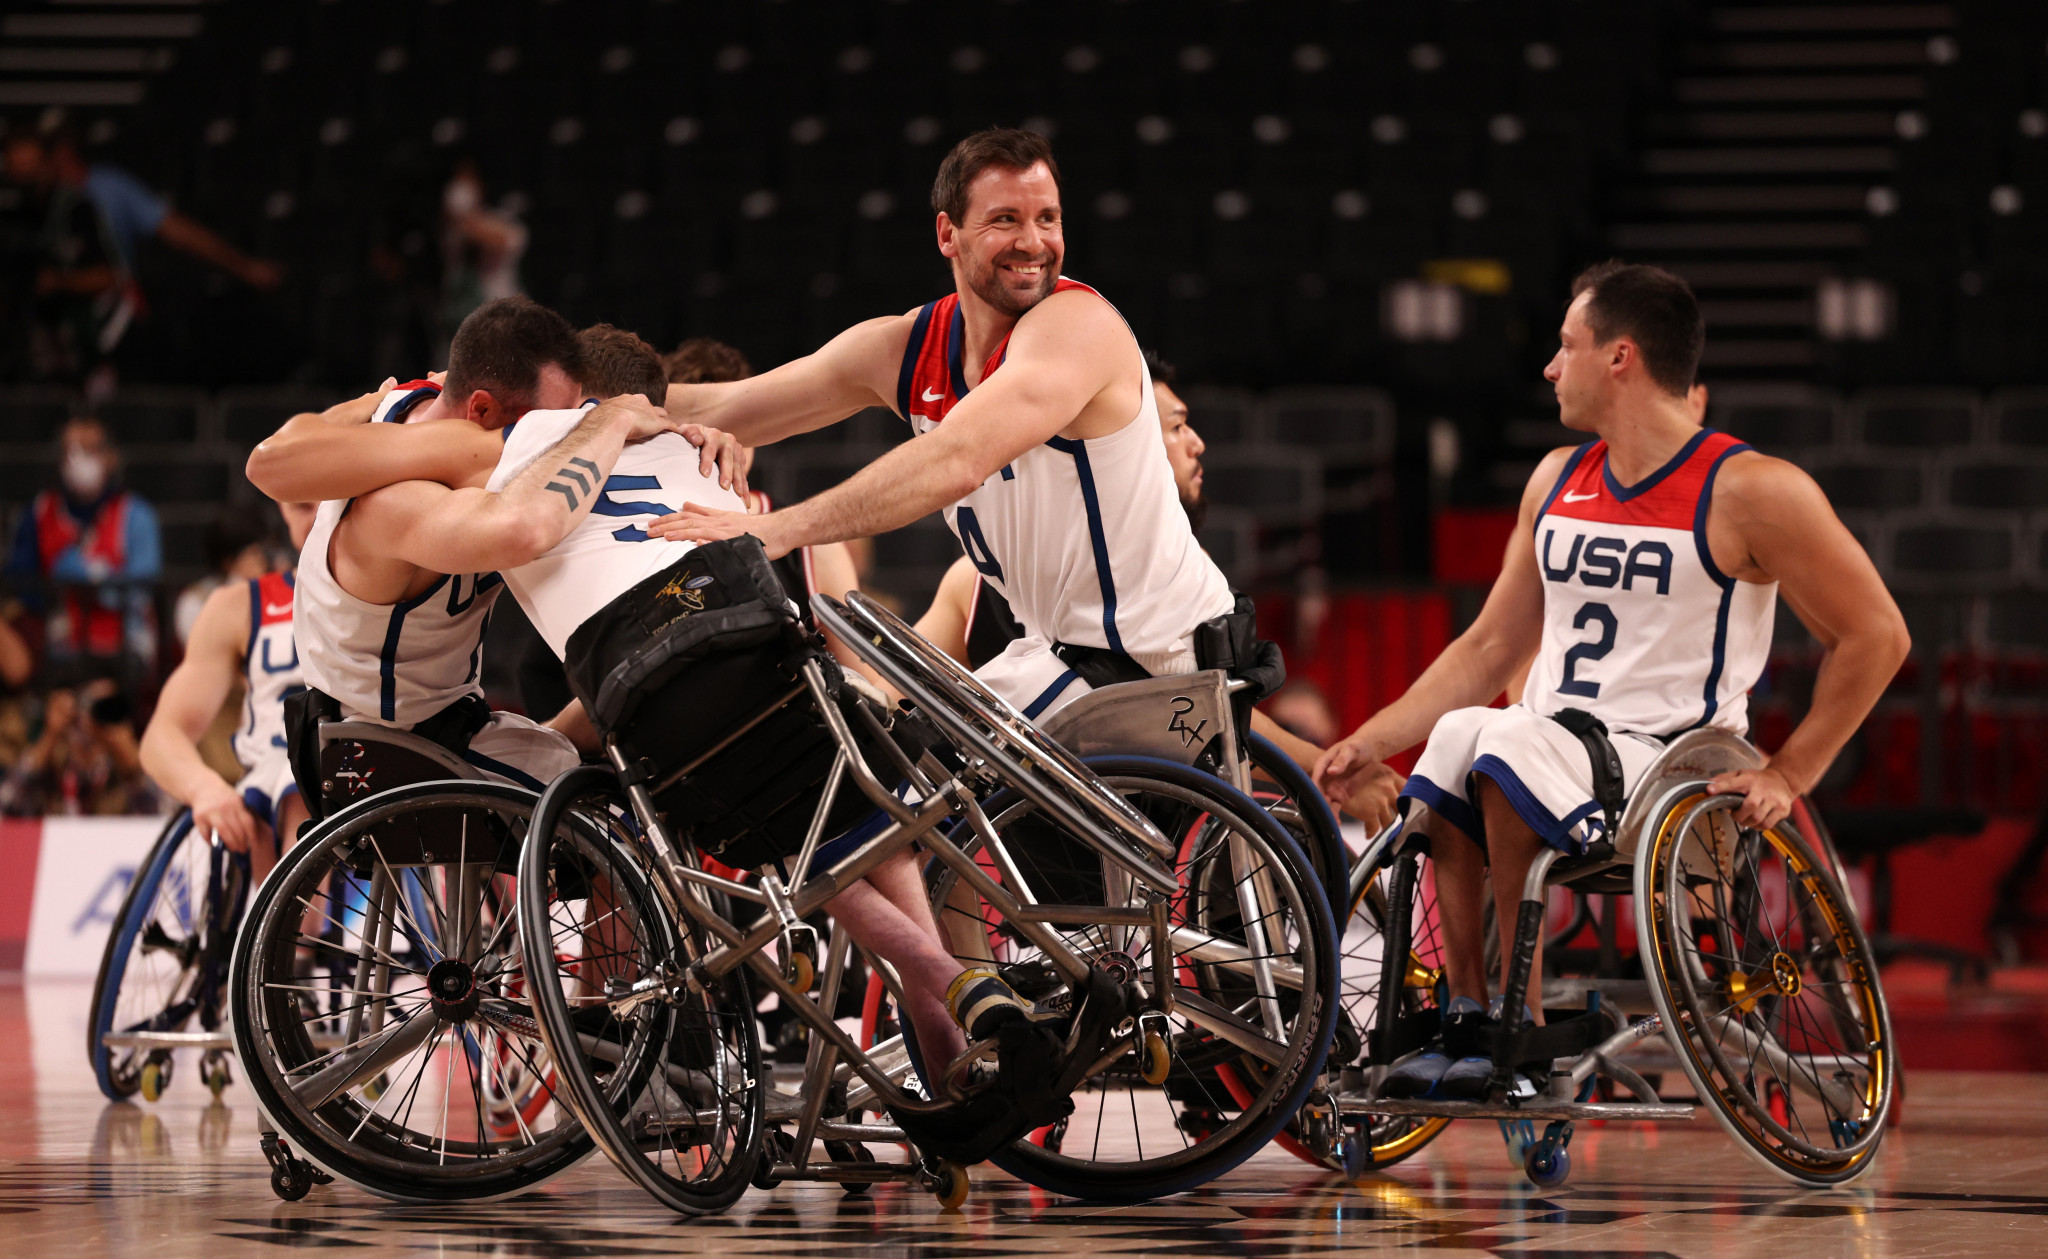 Canada and United States capture titles at IWBF Americas Cup in São Paulo